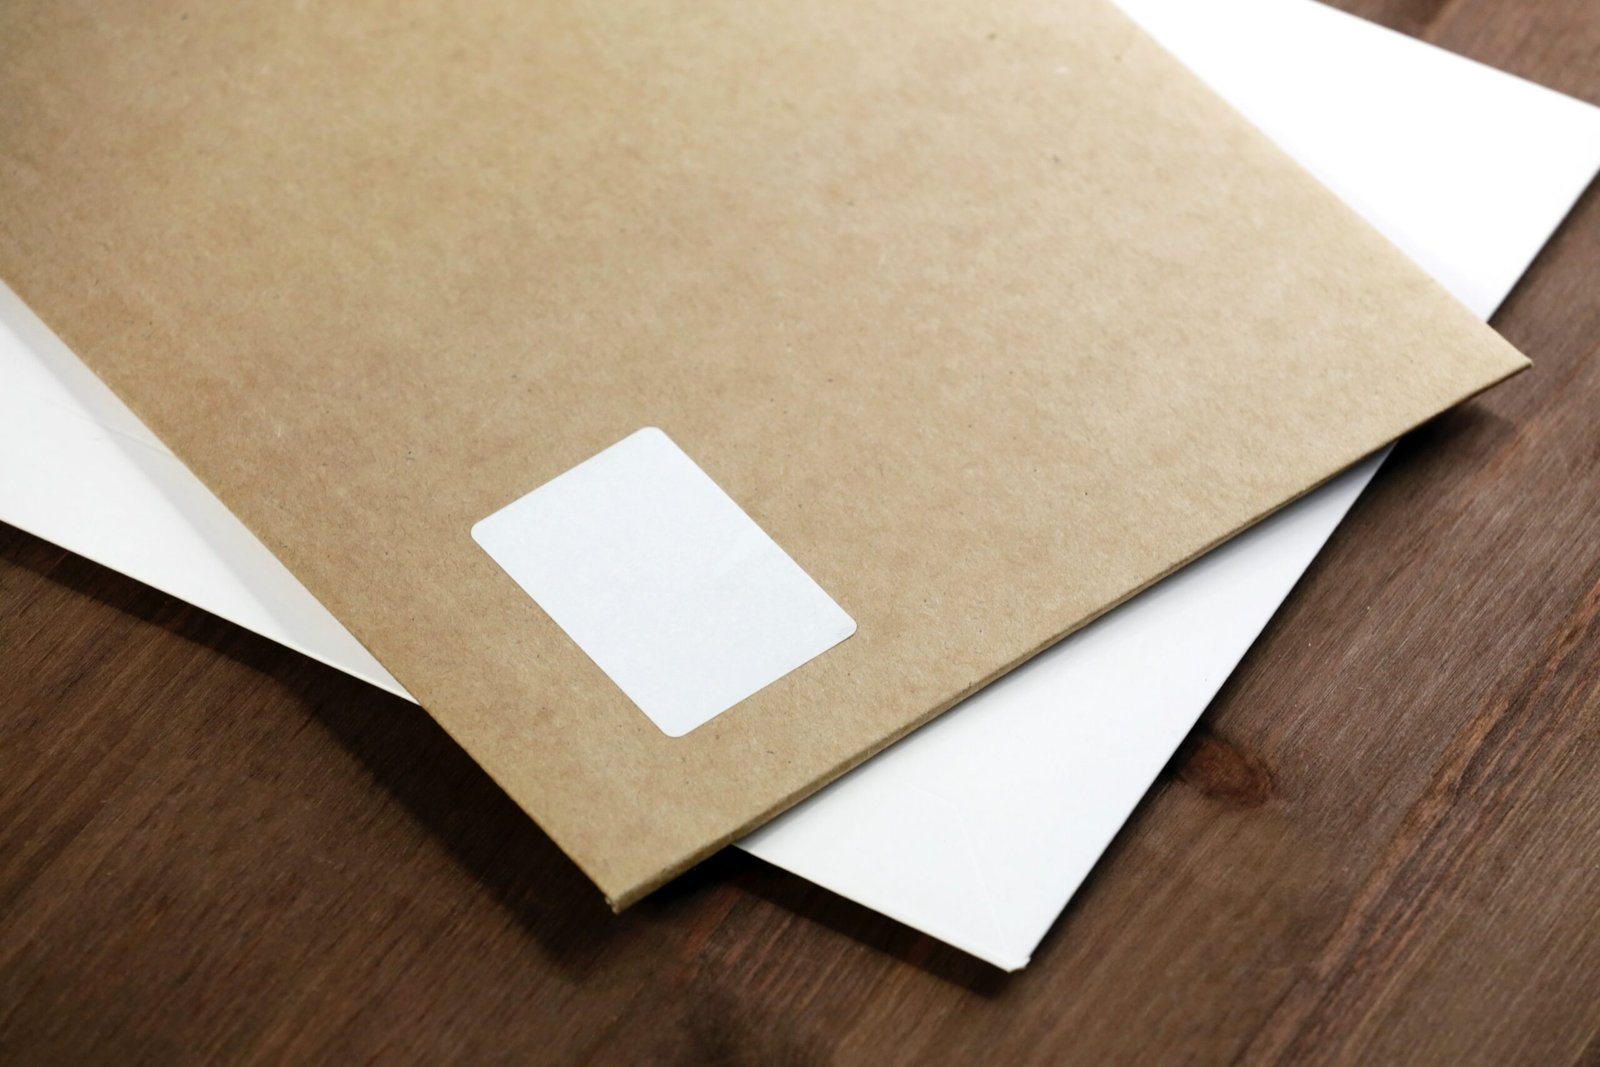 What Should You Write on an Envelope for an Invitation to Graduation?